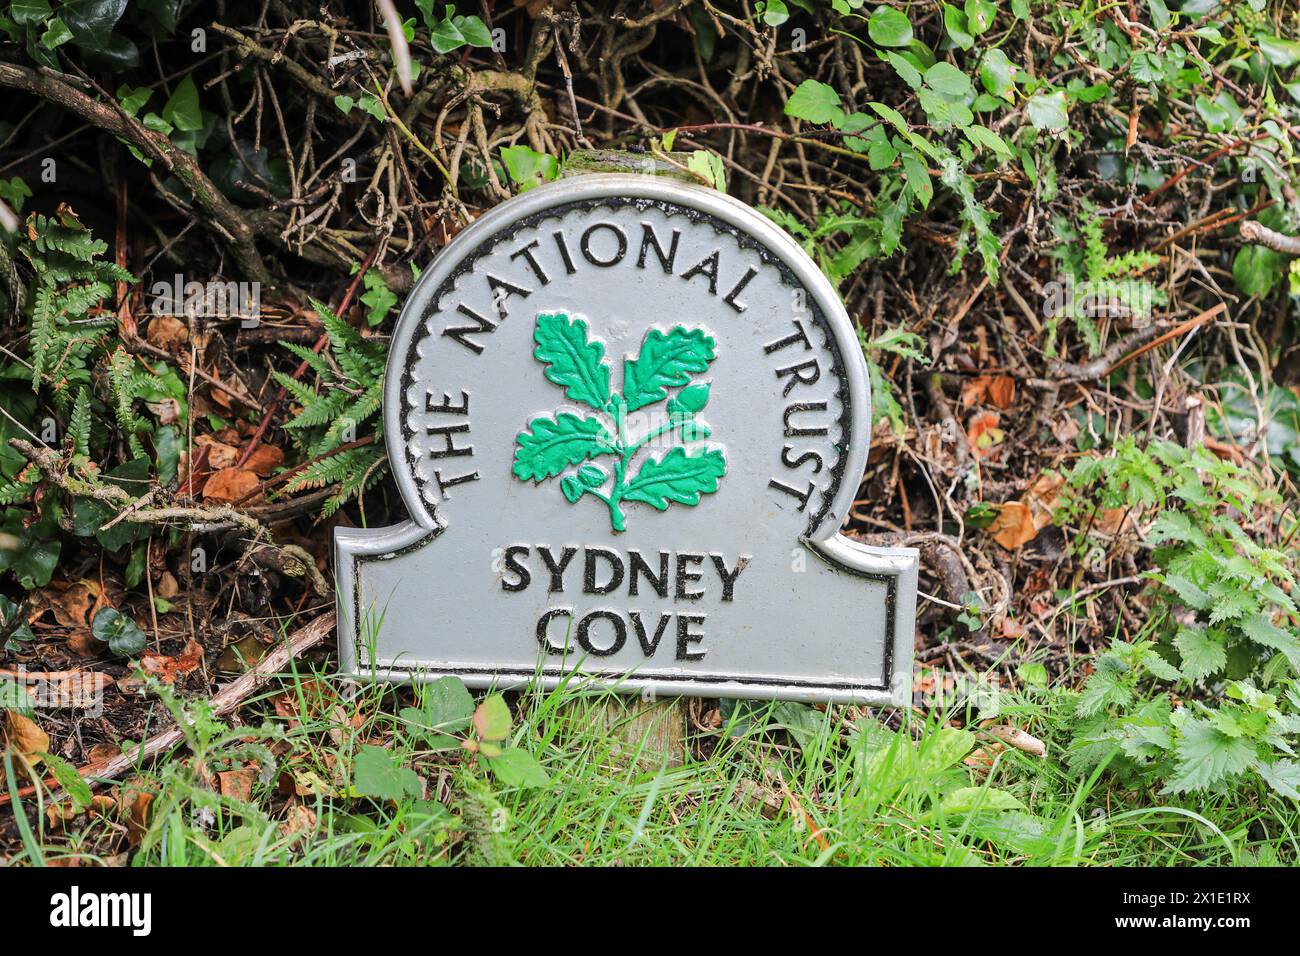 A National Trust omega sign at Sydney Cove, Praa Sands, Cornwall, West Country, England, UK PHOTO TAKEN FROM PUBLIC FOOTPATH Stock Photo